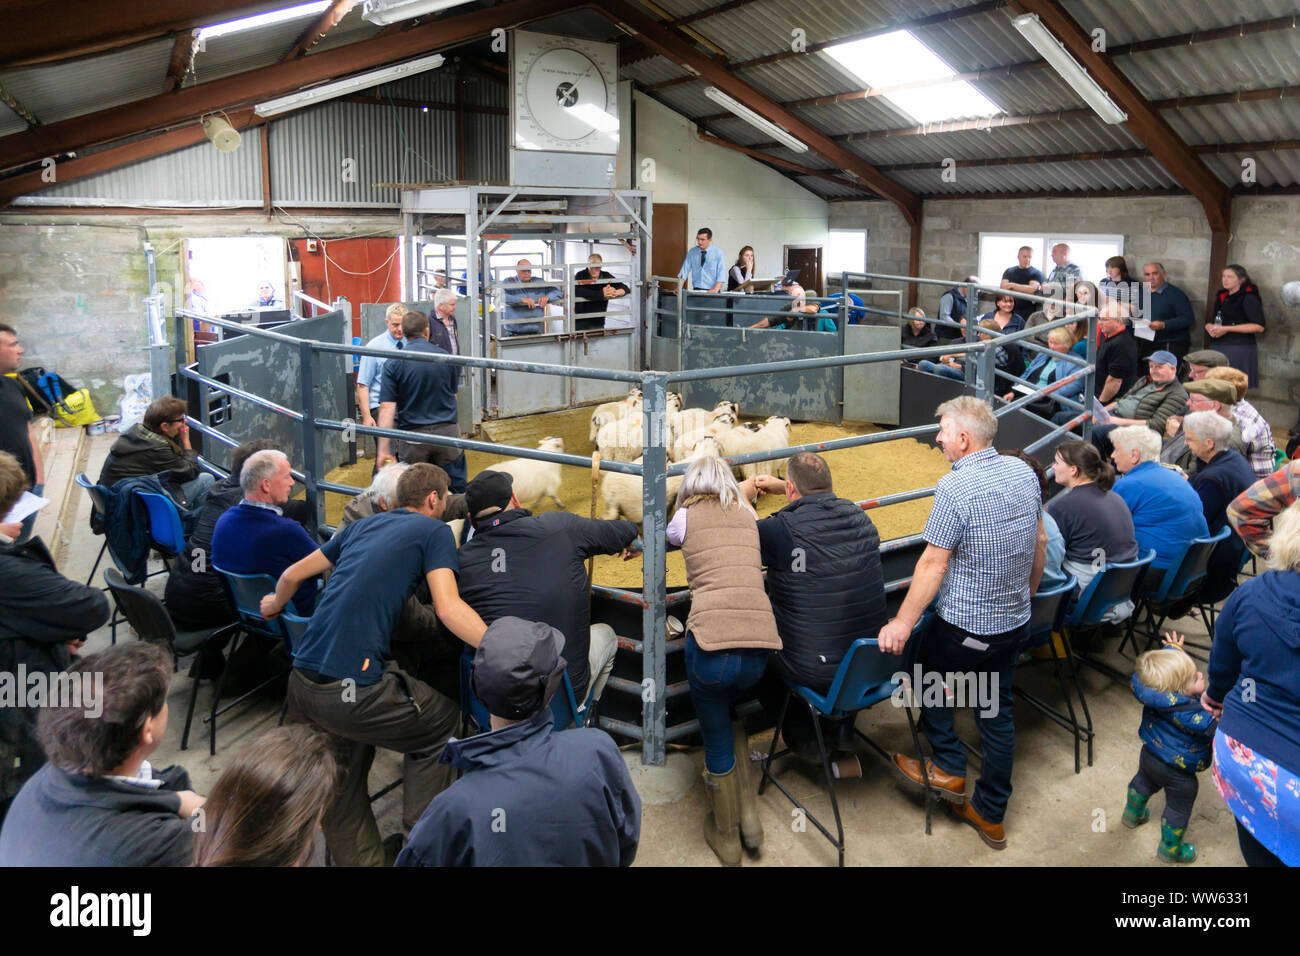 Portree, Scotland, UK - August 26, 2019: Lambs and ewes auction sales in Portree, Skye Island, Scotland. Stock Photo